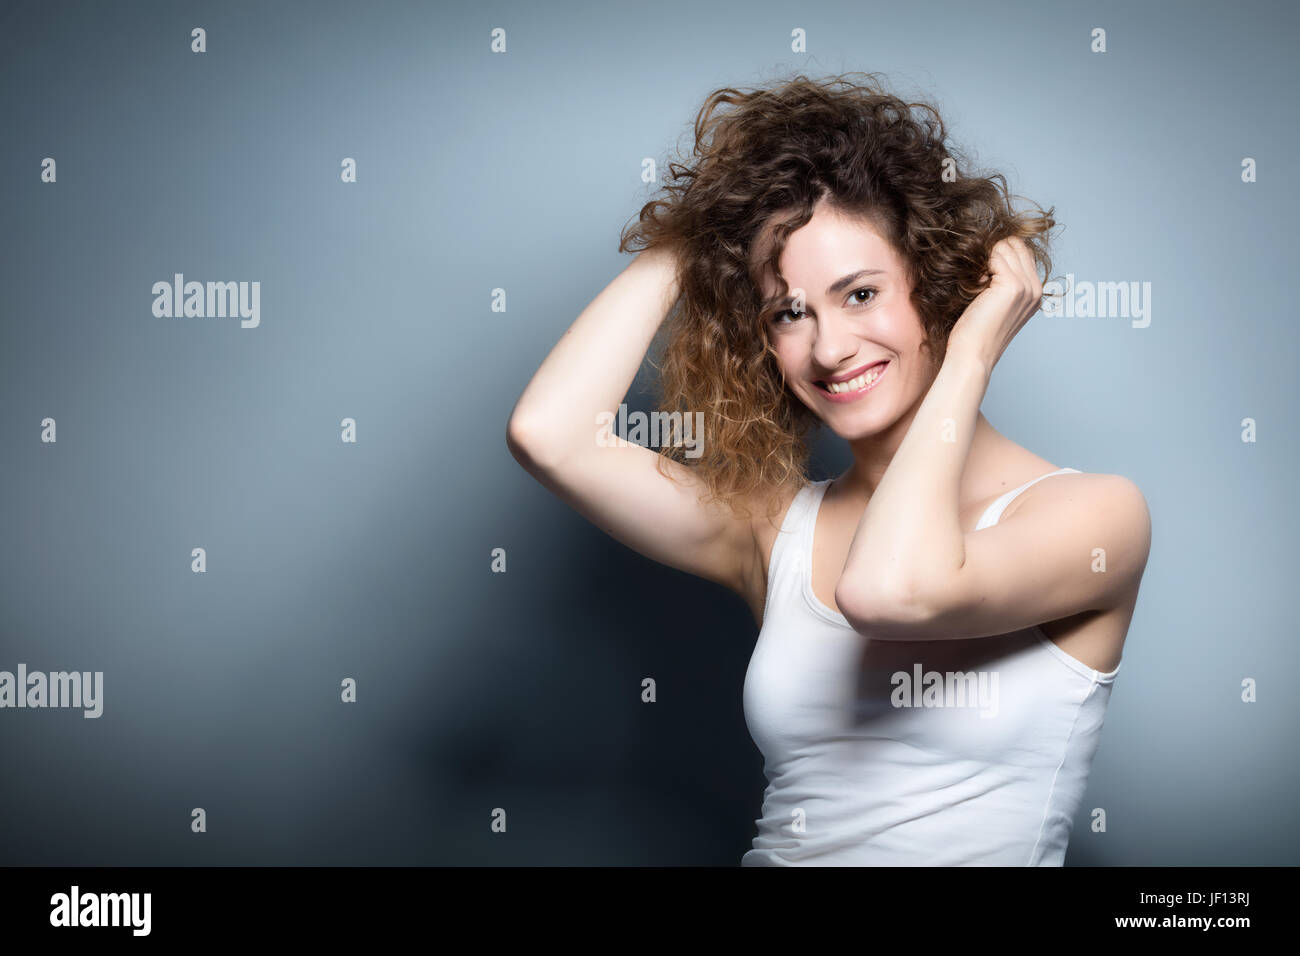 Young woman holding her curly hair up. Beautiful, smiling, positive girl. Casual portrait on a grey background. Natural beauty and hapiness concept. Stock Photo